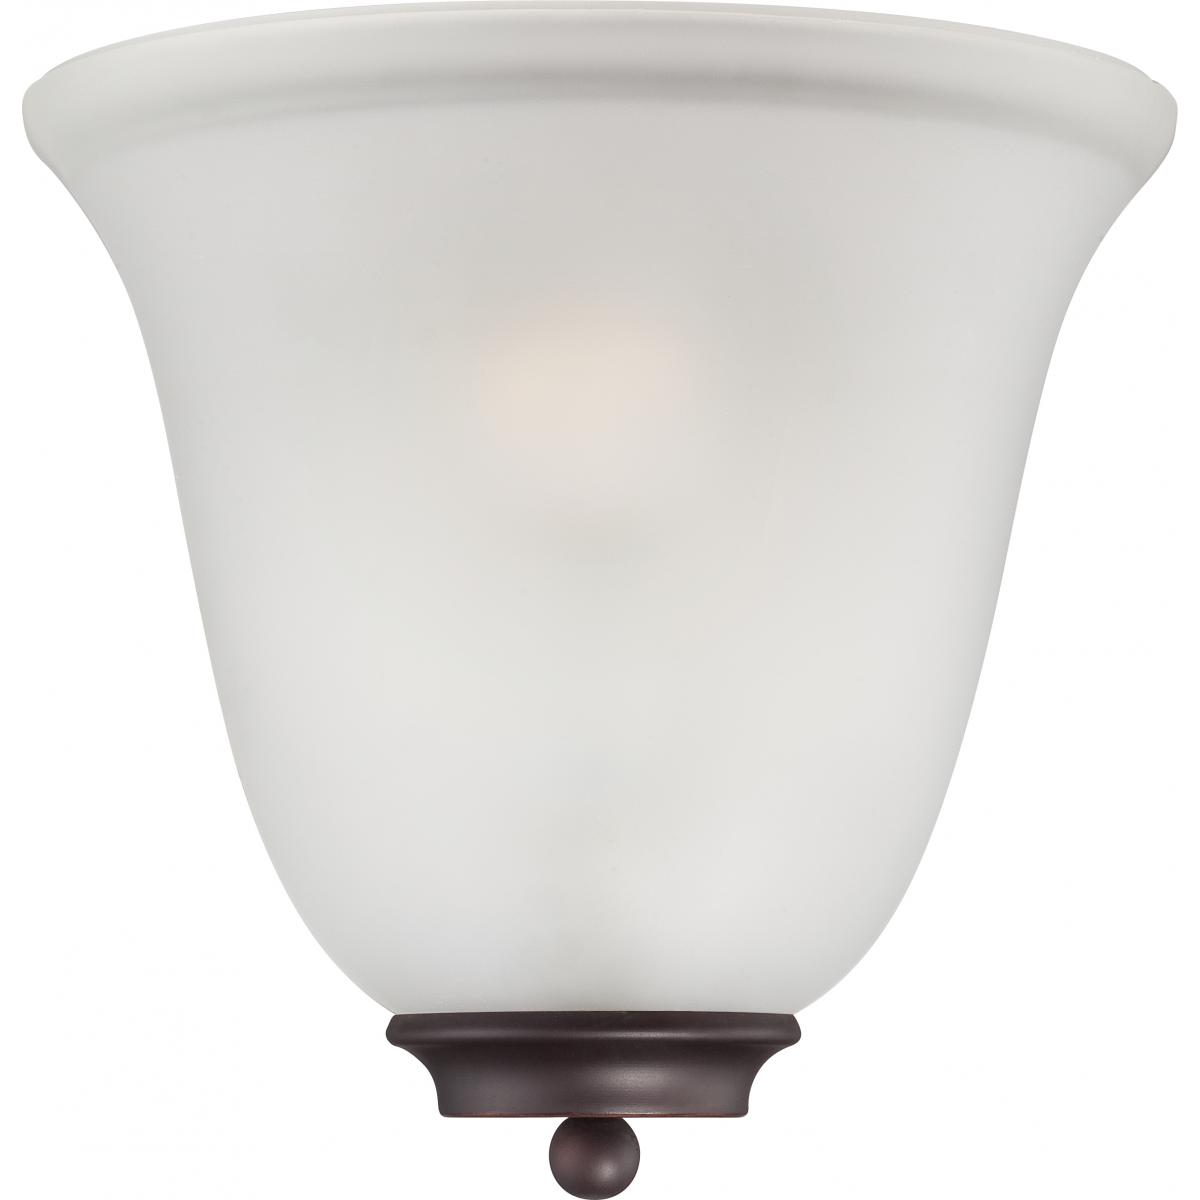 60-5375 EMPIRE 1 LT WALL SCONCE